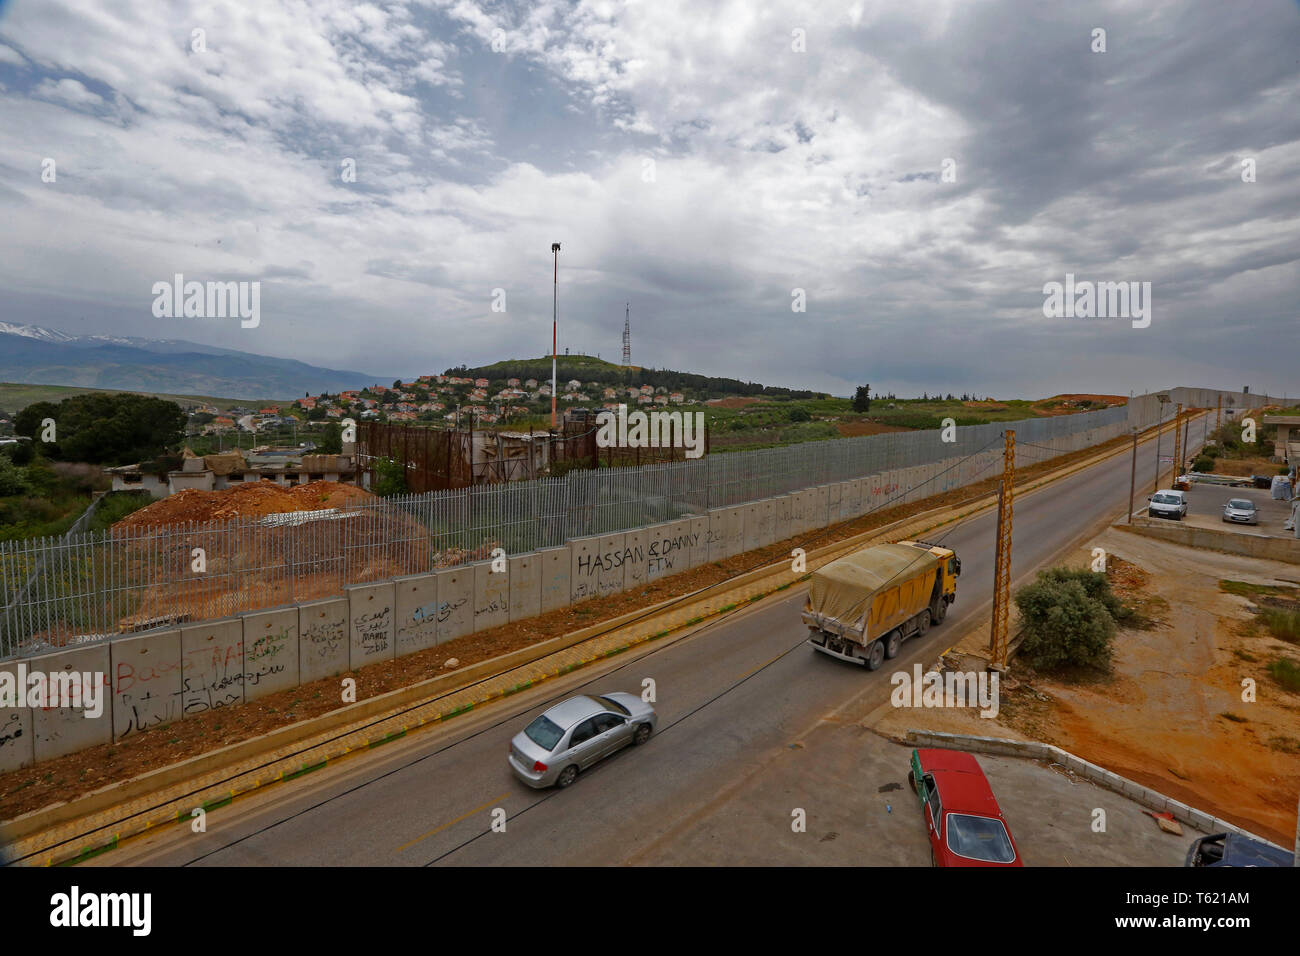 Beirut, Lebanon. 27th Apr, 2019. Vehicles run alongside the separation wall along the border with Israel, in southern Lebanon, April 27, 2019. Israel's construction of a wall along its border with Lebanon is a contentious issue between the two countries. Credit: Bilal Jawich/Xinhua/Alamy Live News Stock Photo